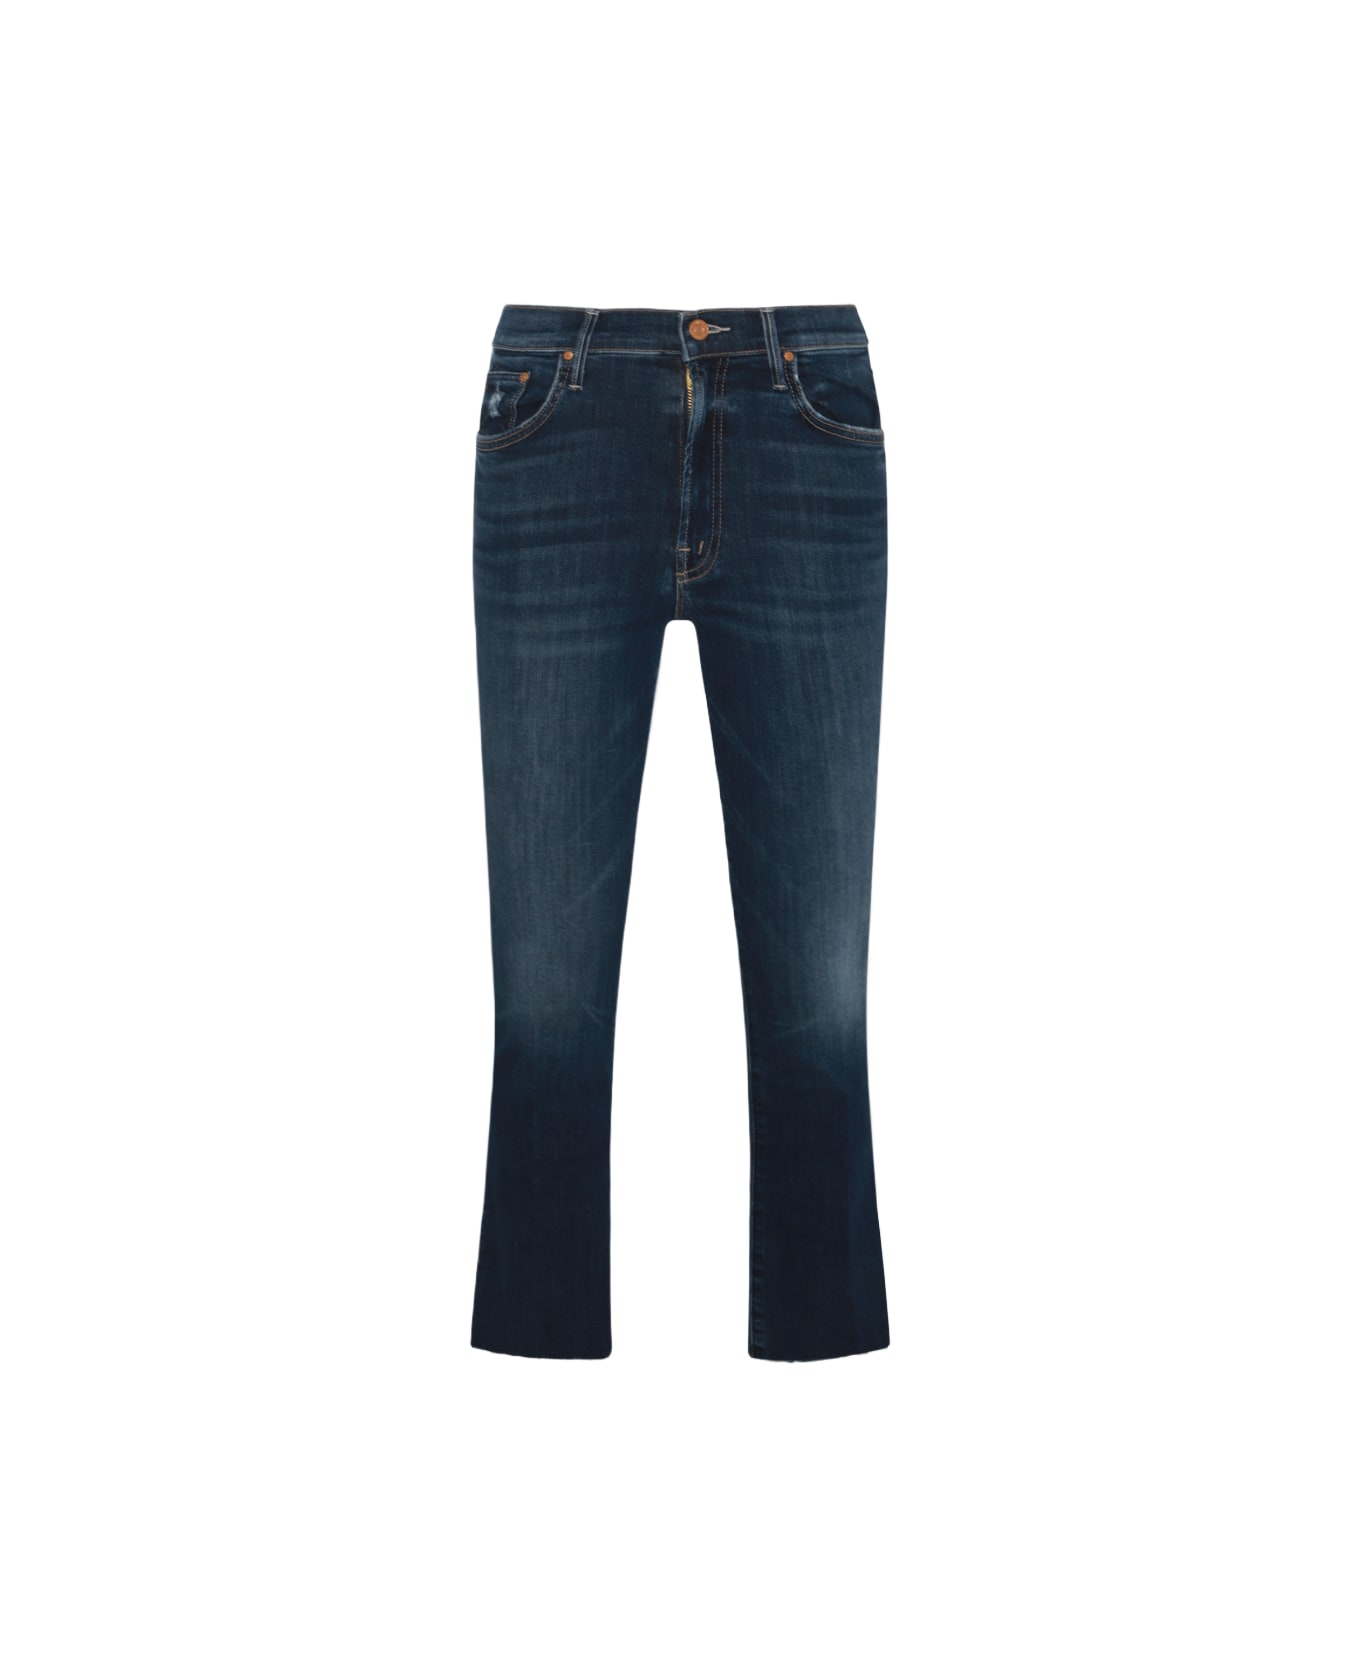 Mother Blue Cotton Jeans - TEAMING UP